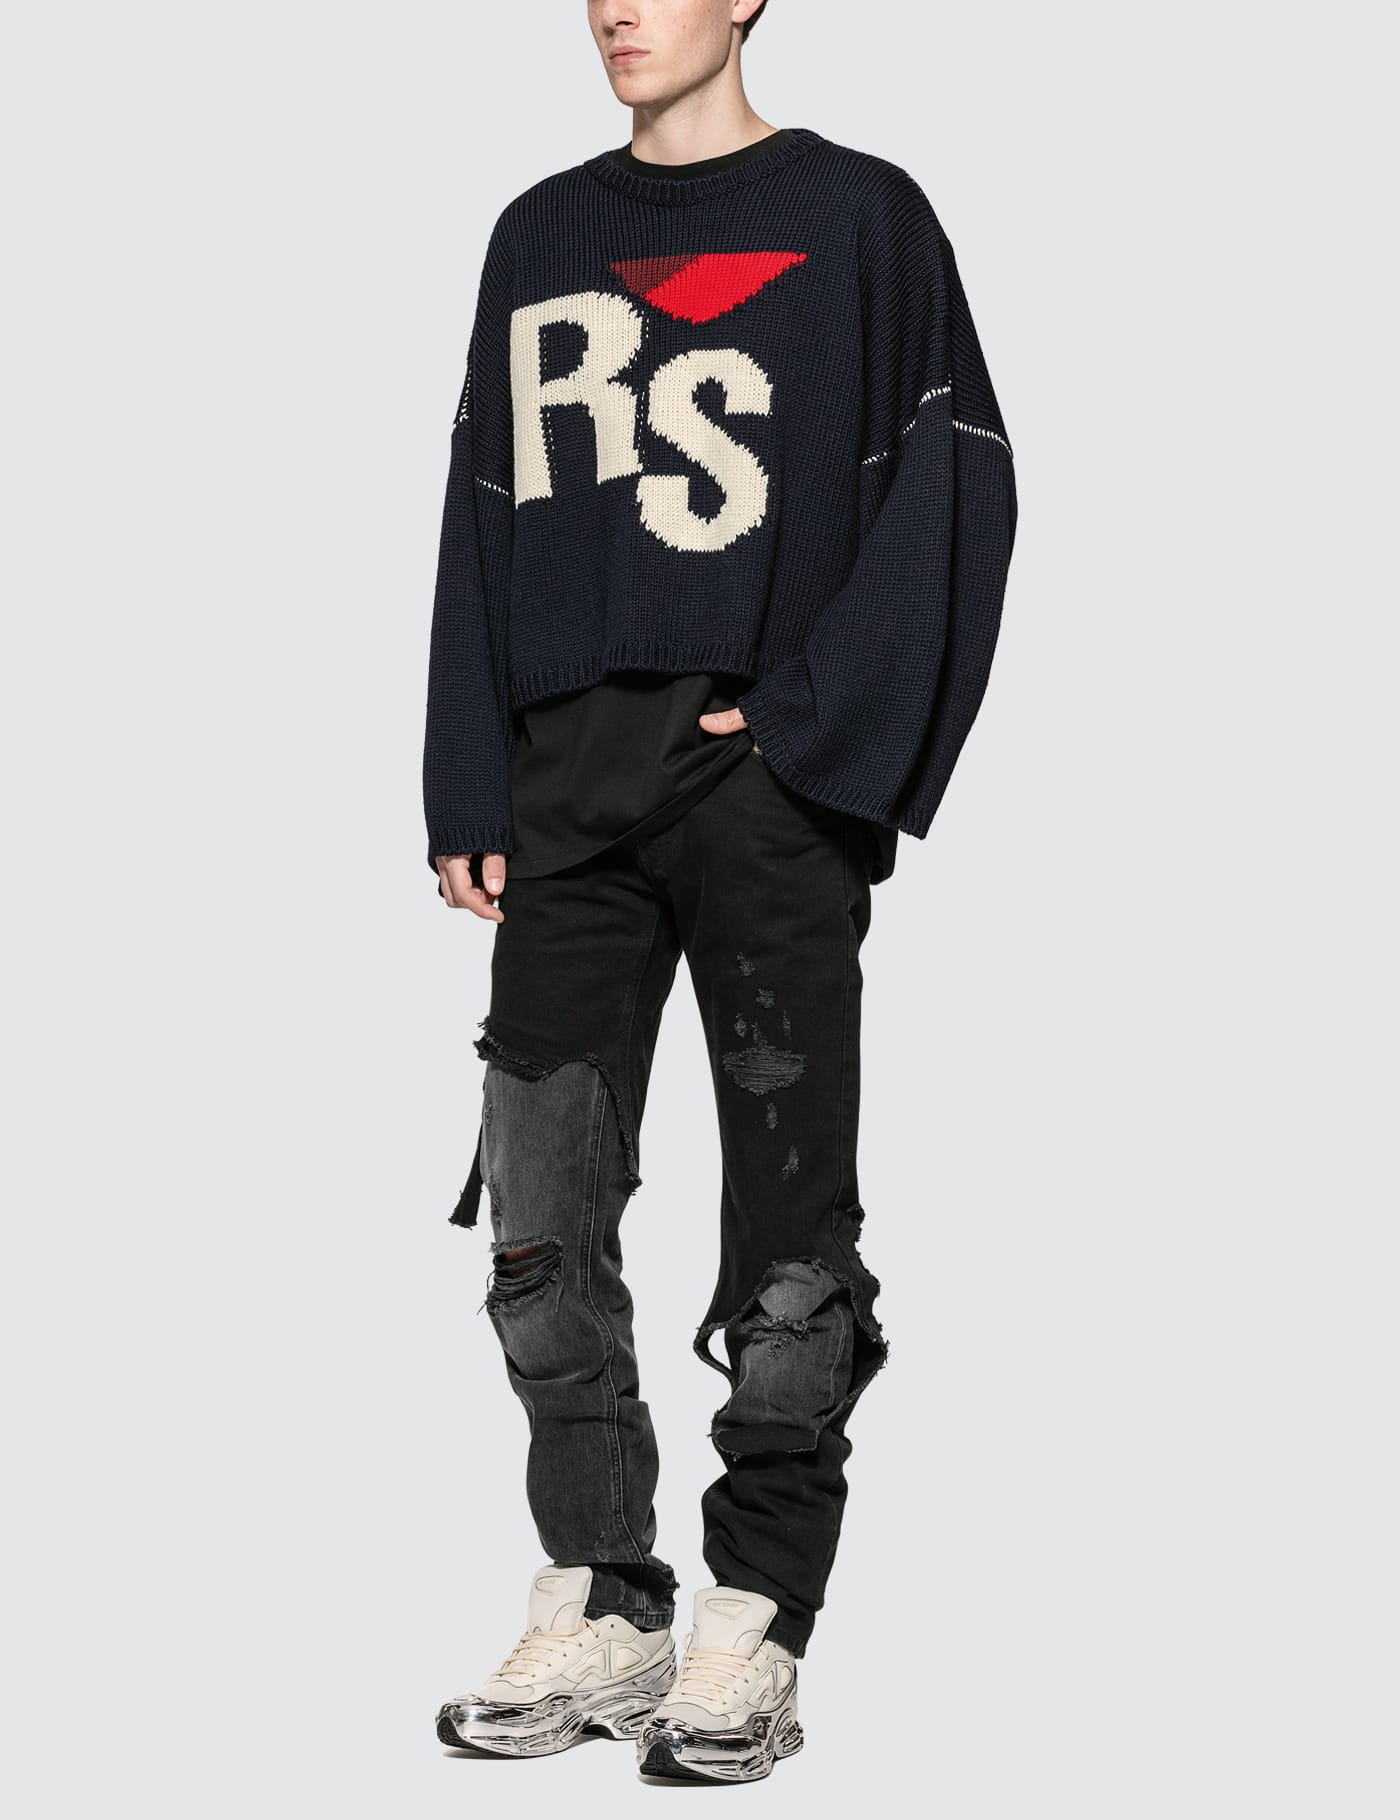 how do raf simons shoes fit